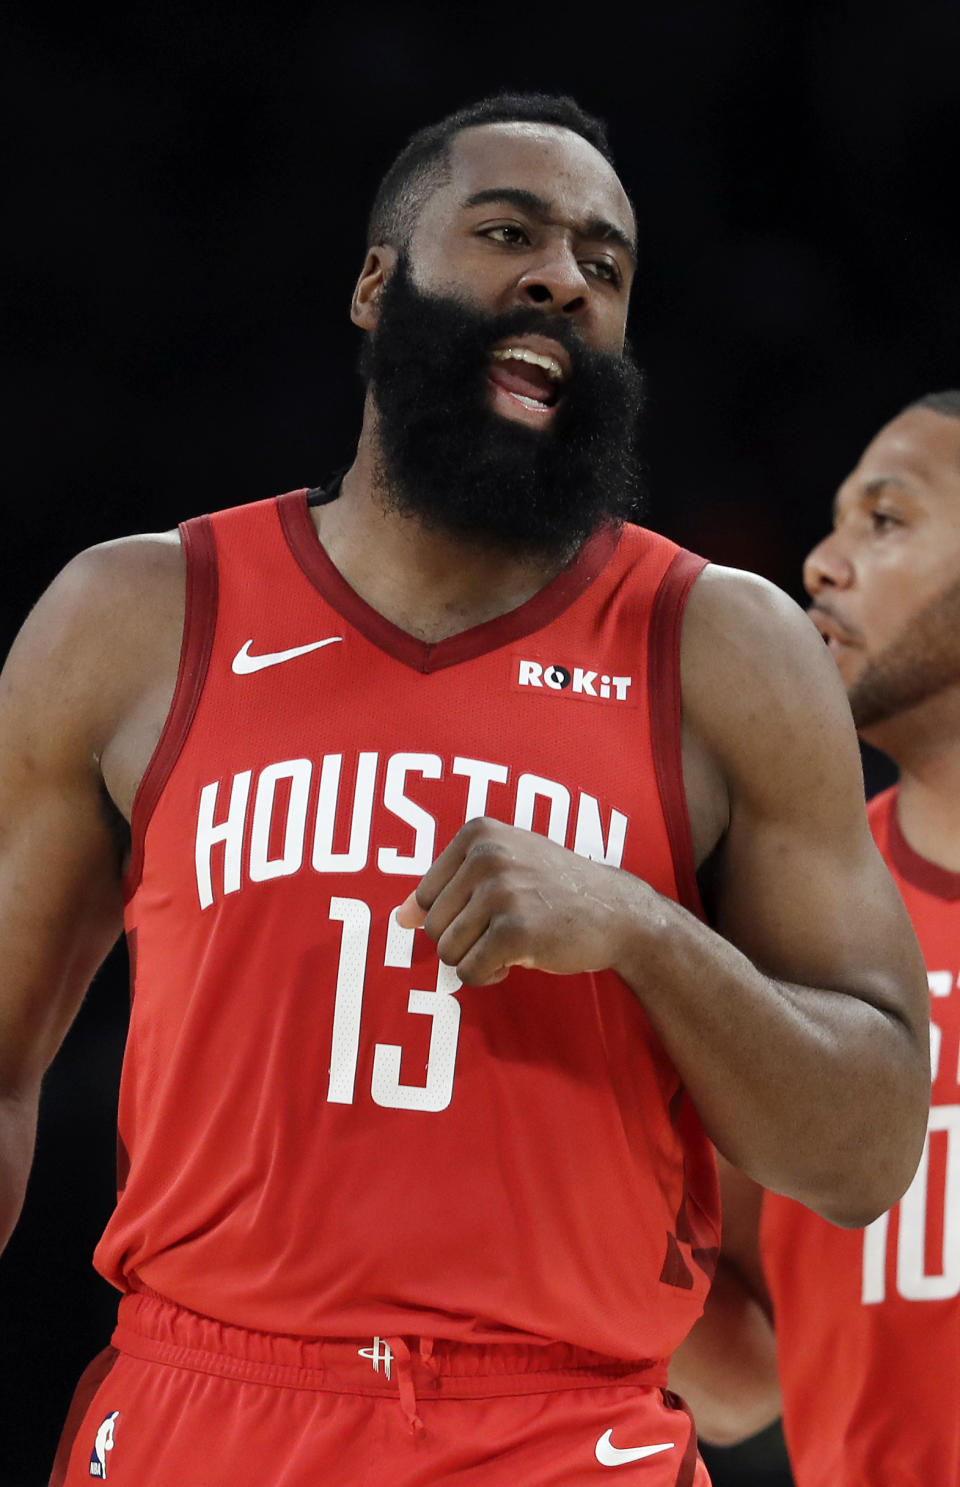 Houston Rockets' James Harden (13) reacts after making a 3-point basket against the Los Angeles Lakers during the first half of an NBA basketball game Thursday, Feb. 21, 2019, in Los Angeles. (AP Photo/Marcio Jose Sanchez)